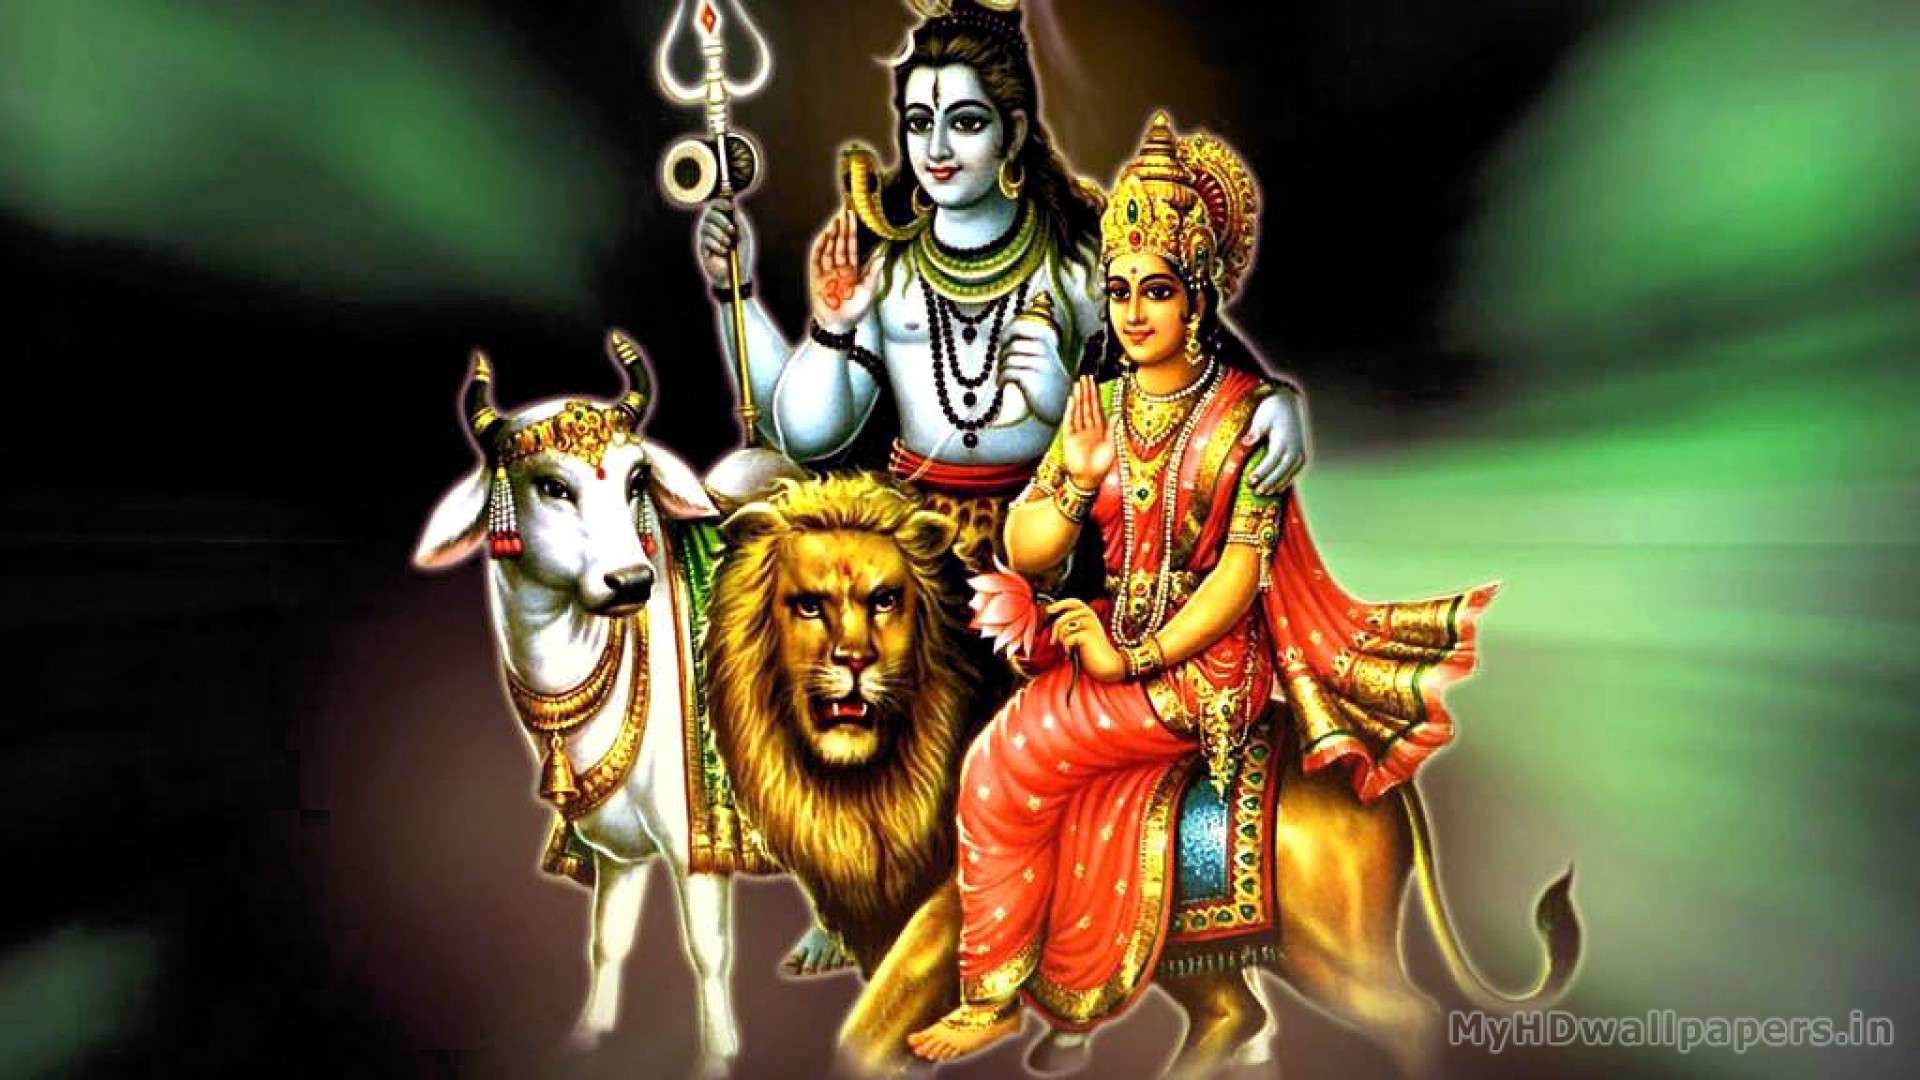 1920x1080 Lord Shiva And Parvati Wallpapers Hd Hd Wallpapers 